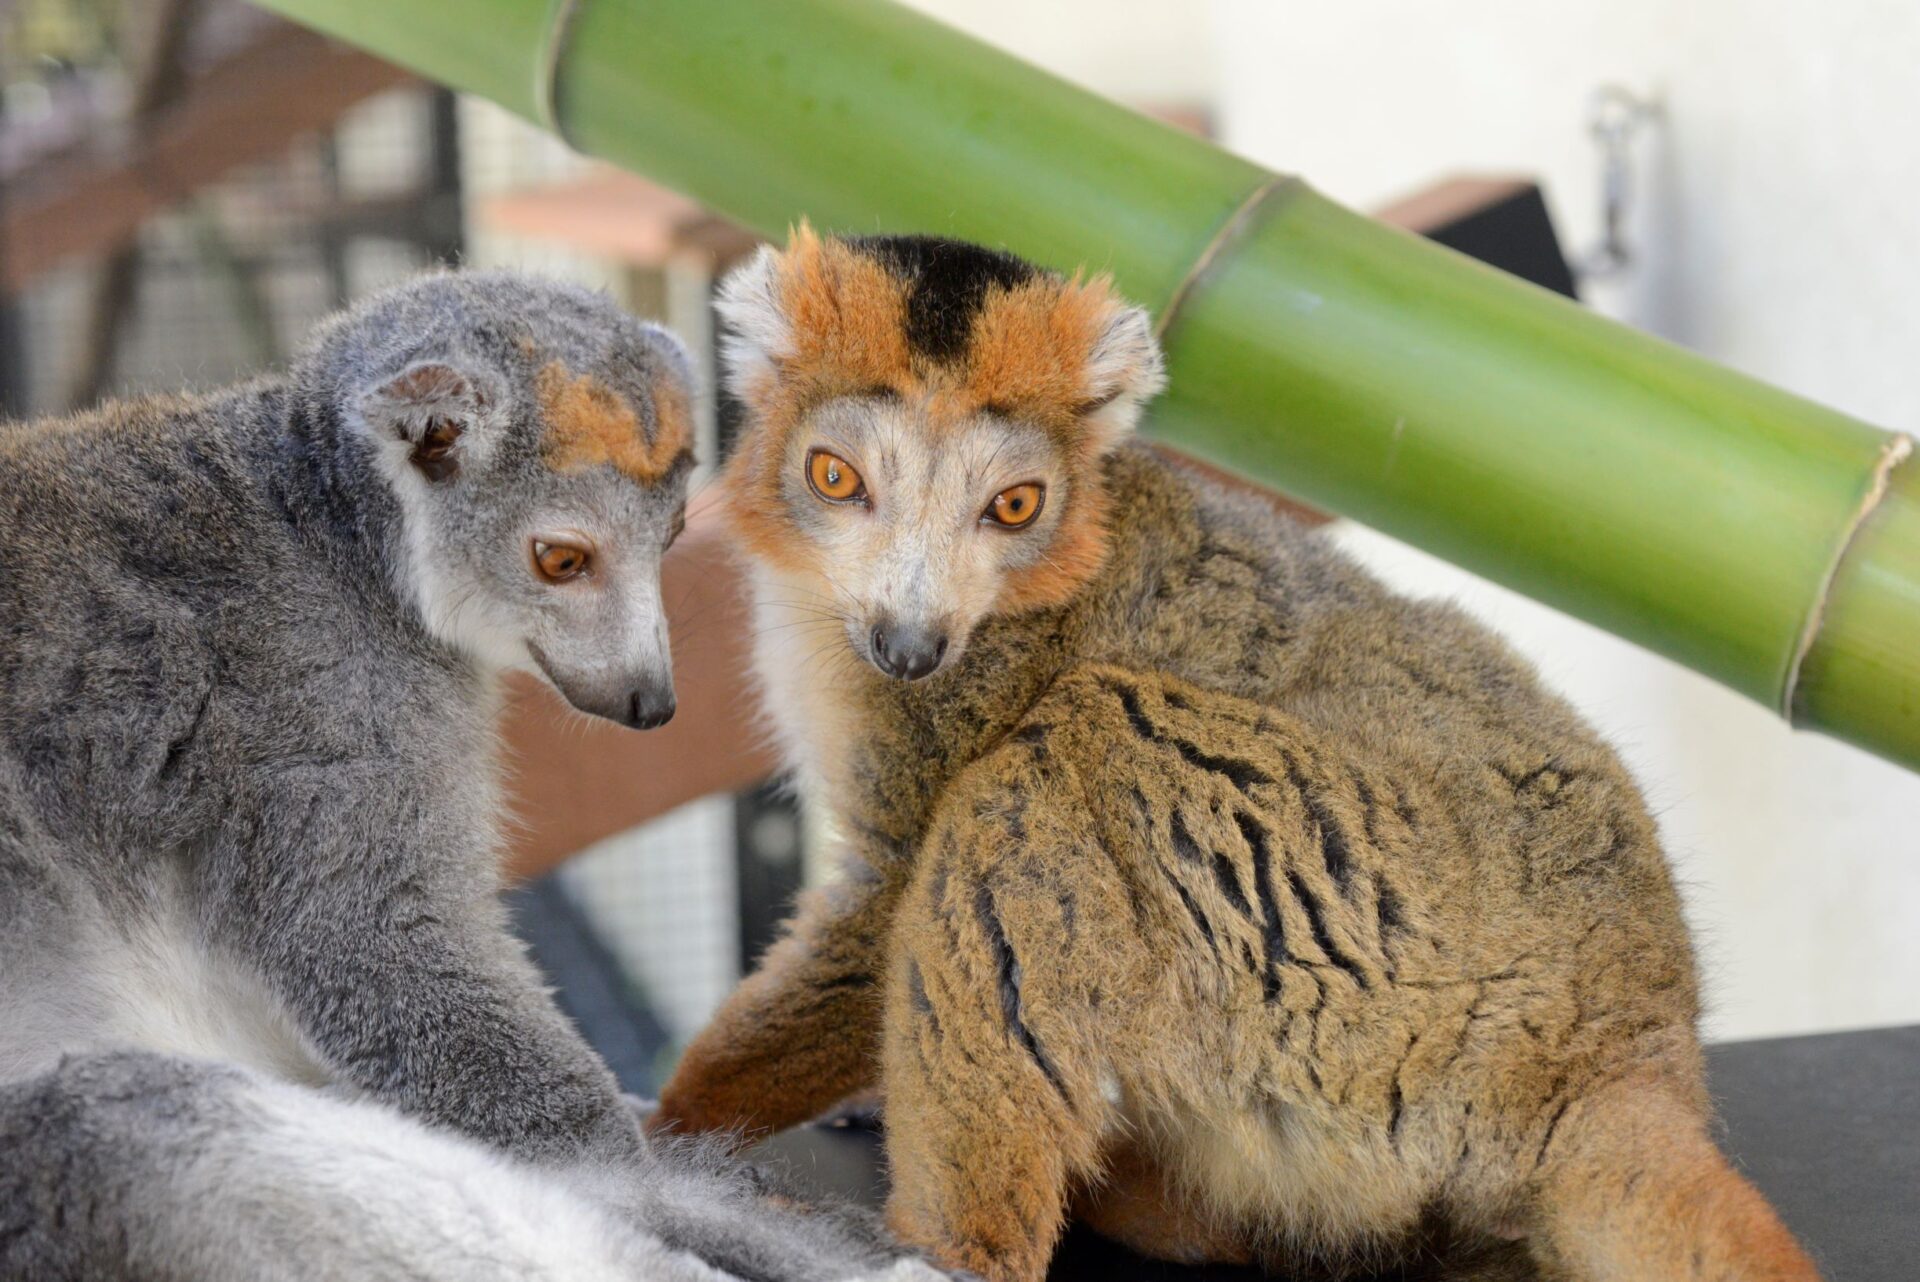 A pair of crowned lemurs sit close together